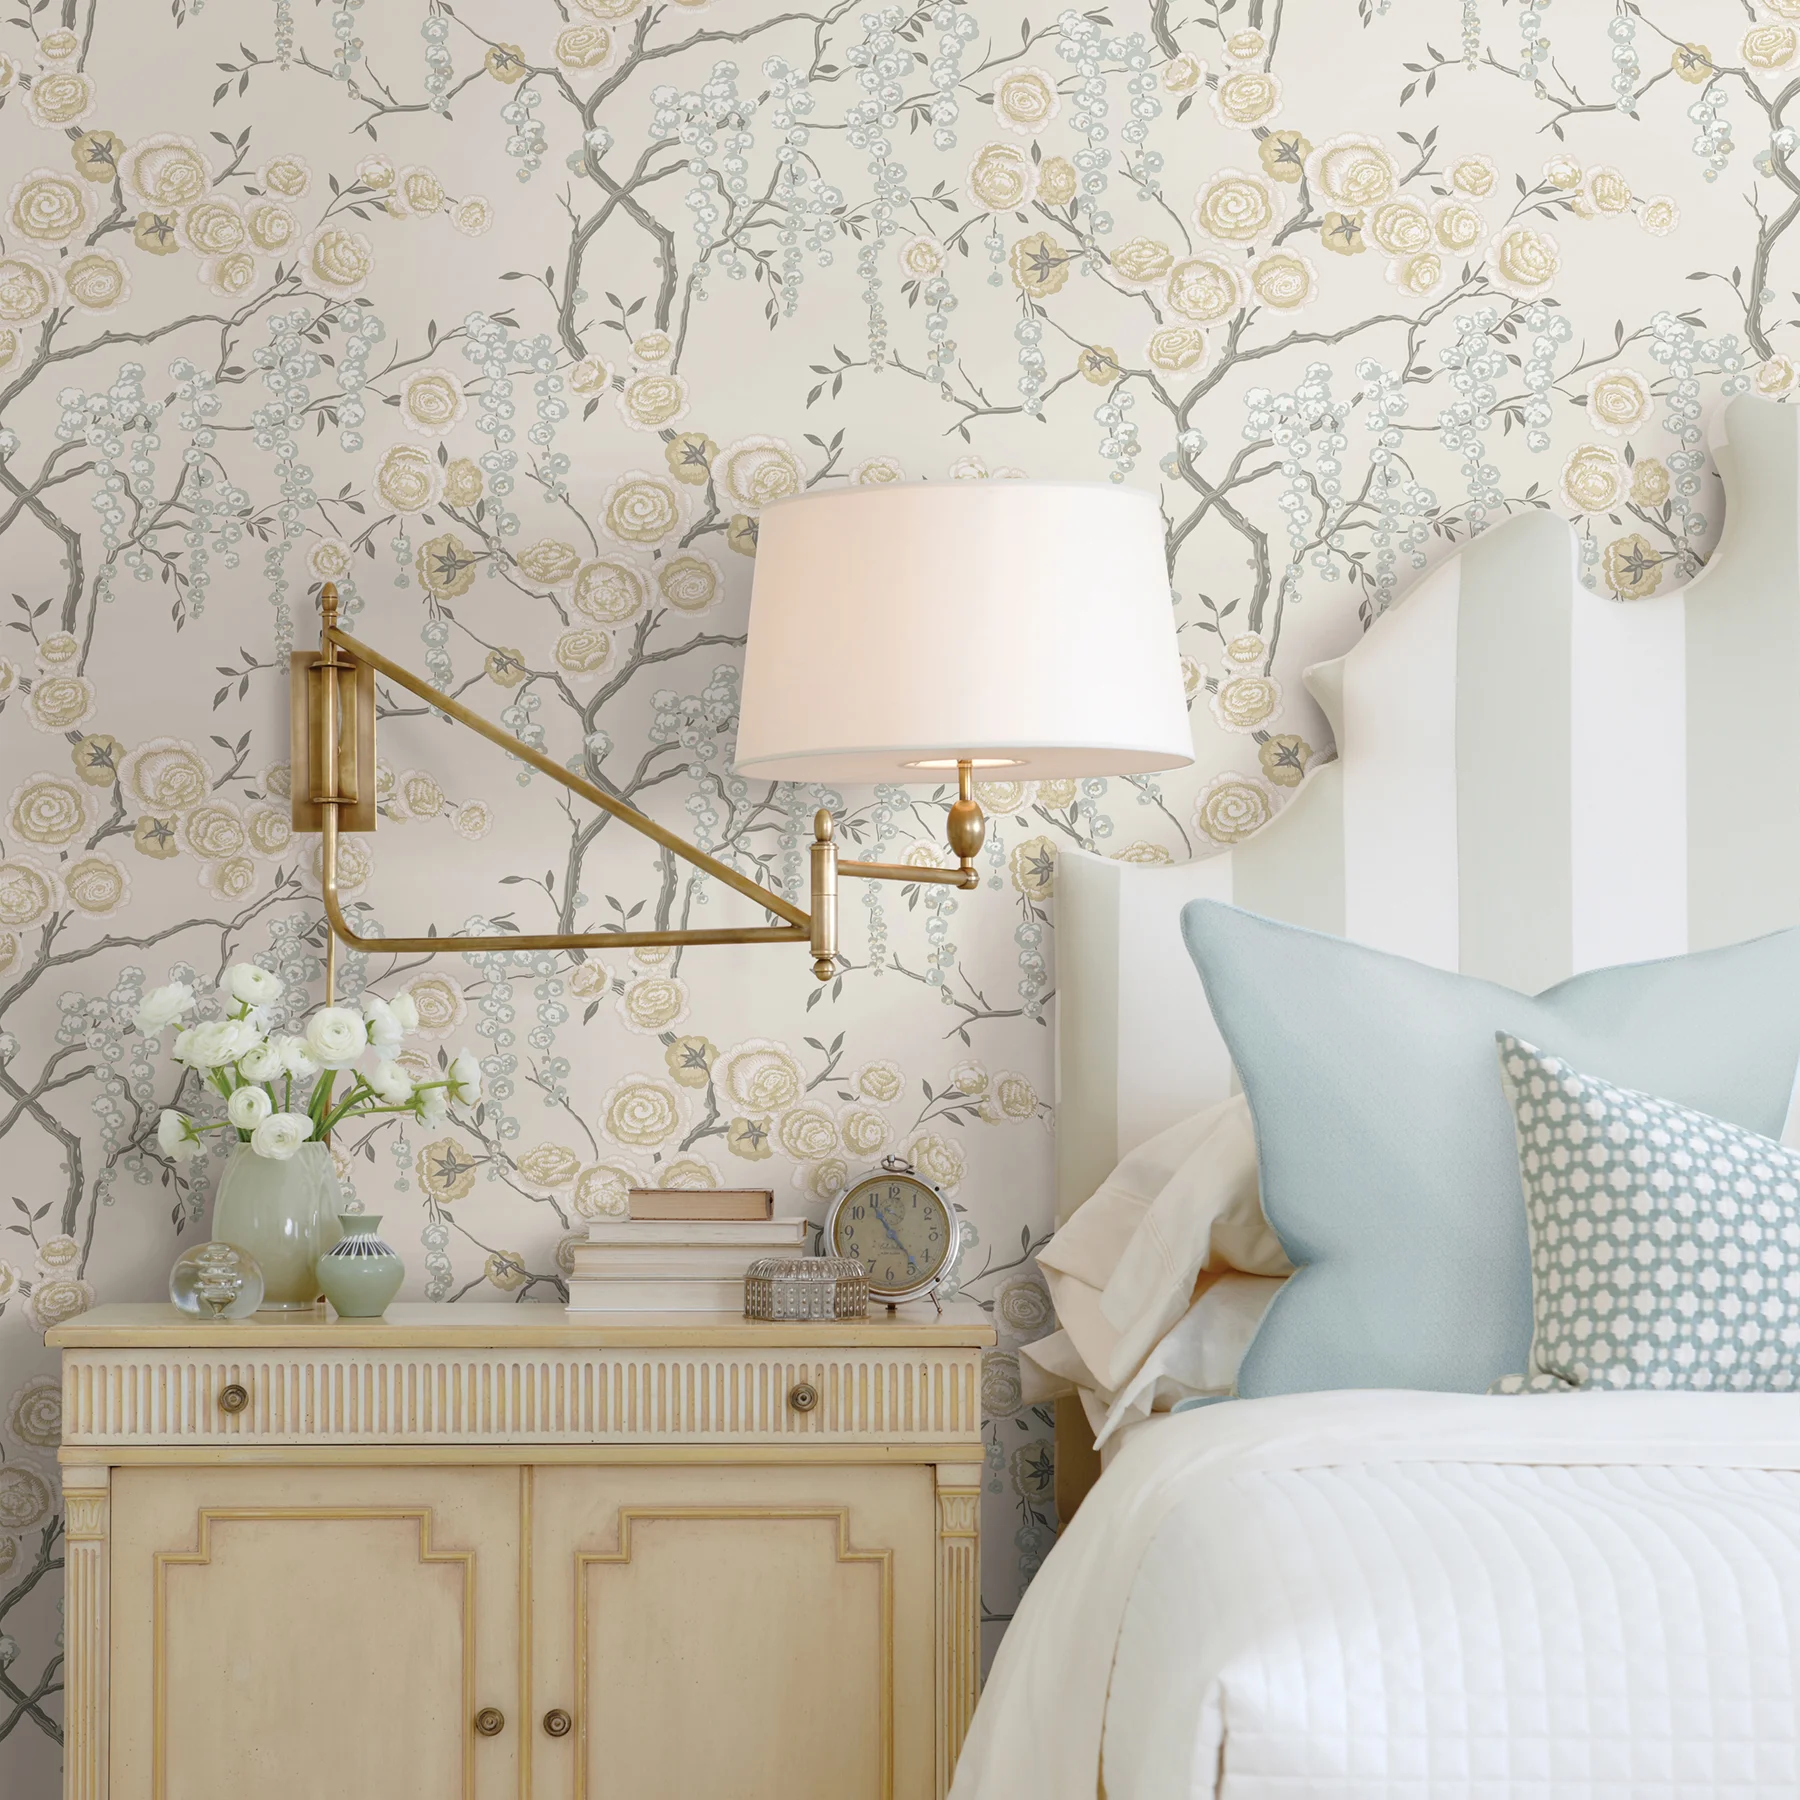 Pleasant colors combined with interesting patterns in the Chinoiserie style will turn your bedroom into a work of art